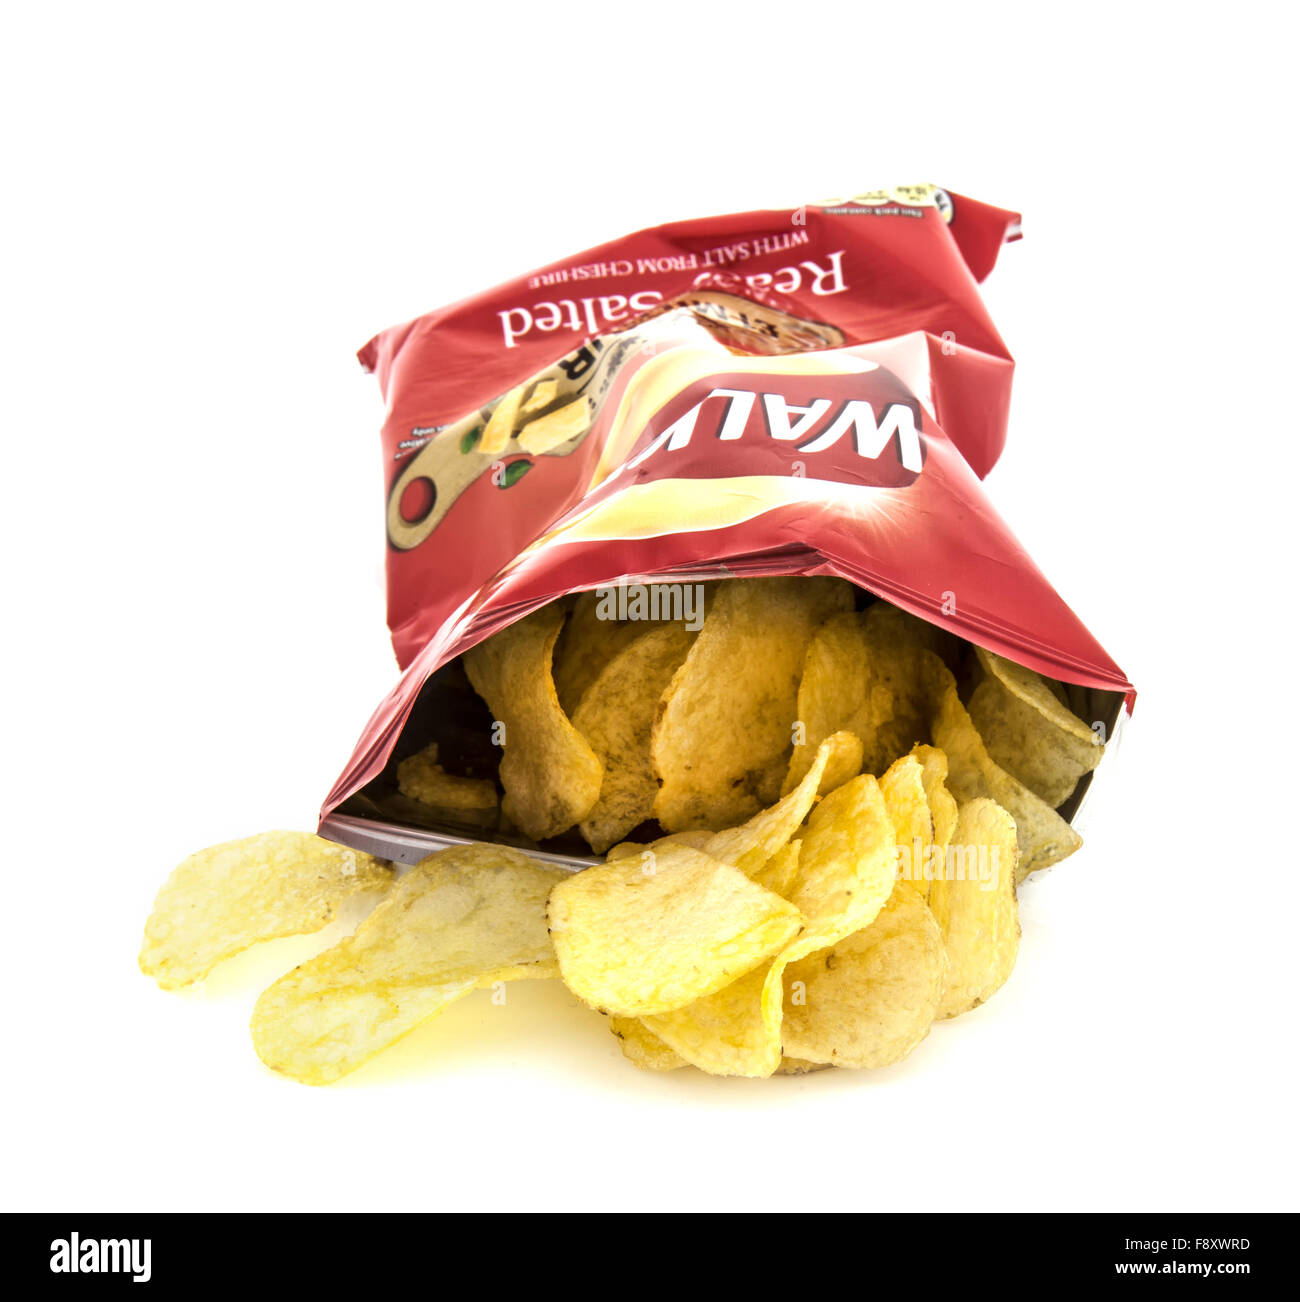 Packet of Walkers ready salted crisps on a white background Stock Photo